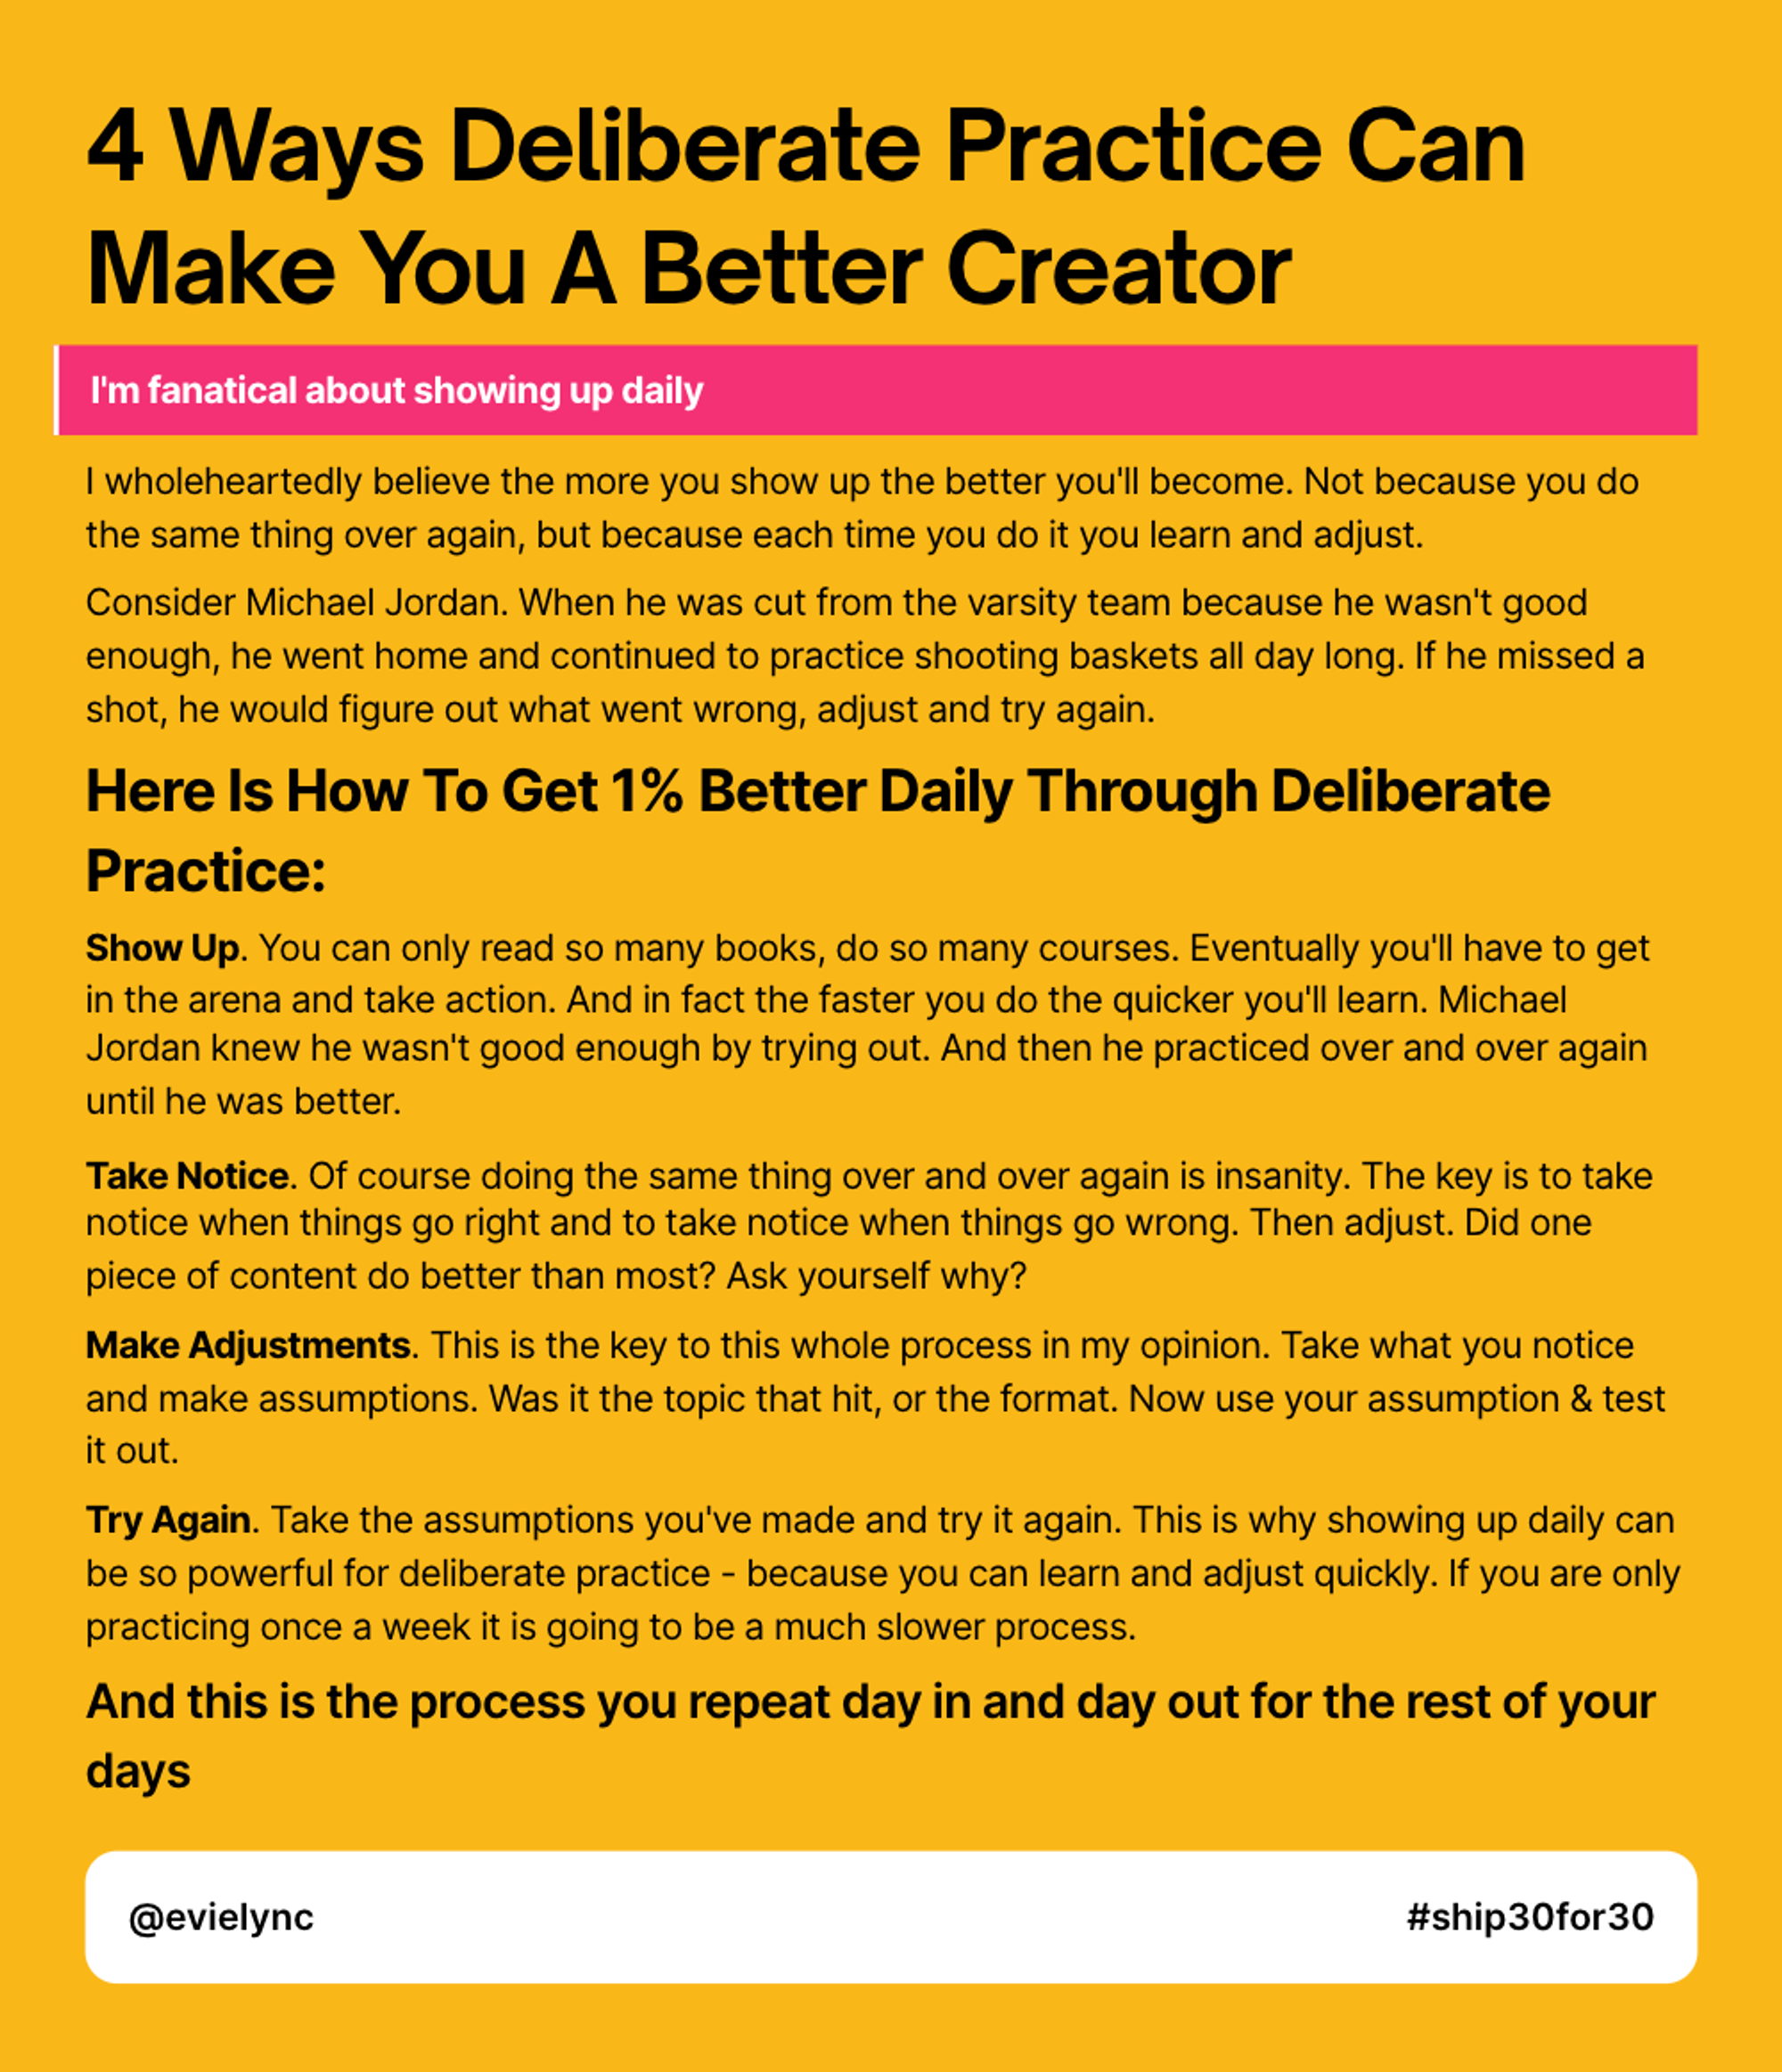 4 Ways Deliberate Practice Can Make You A Better Creator